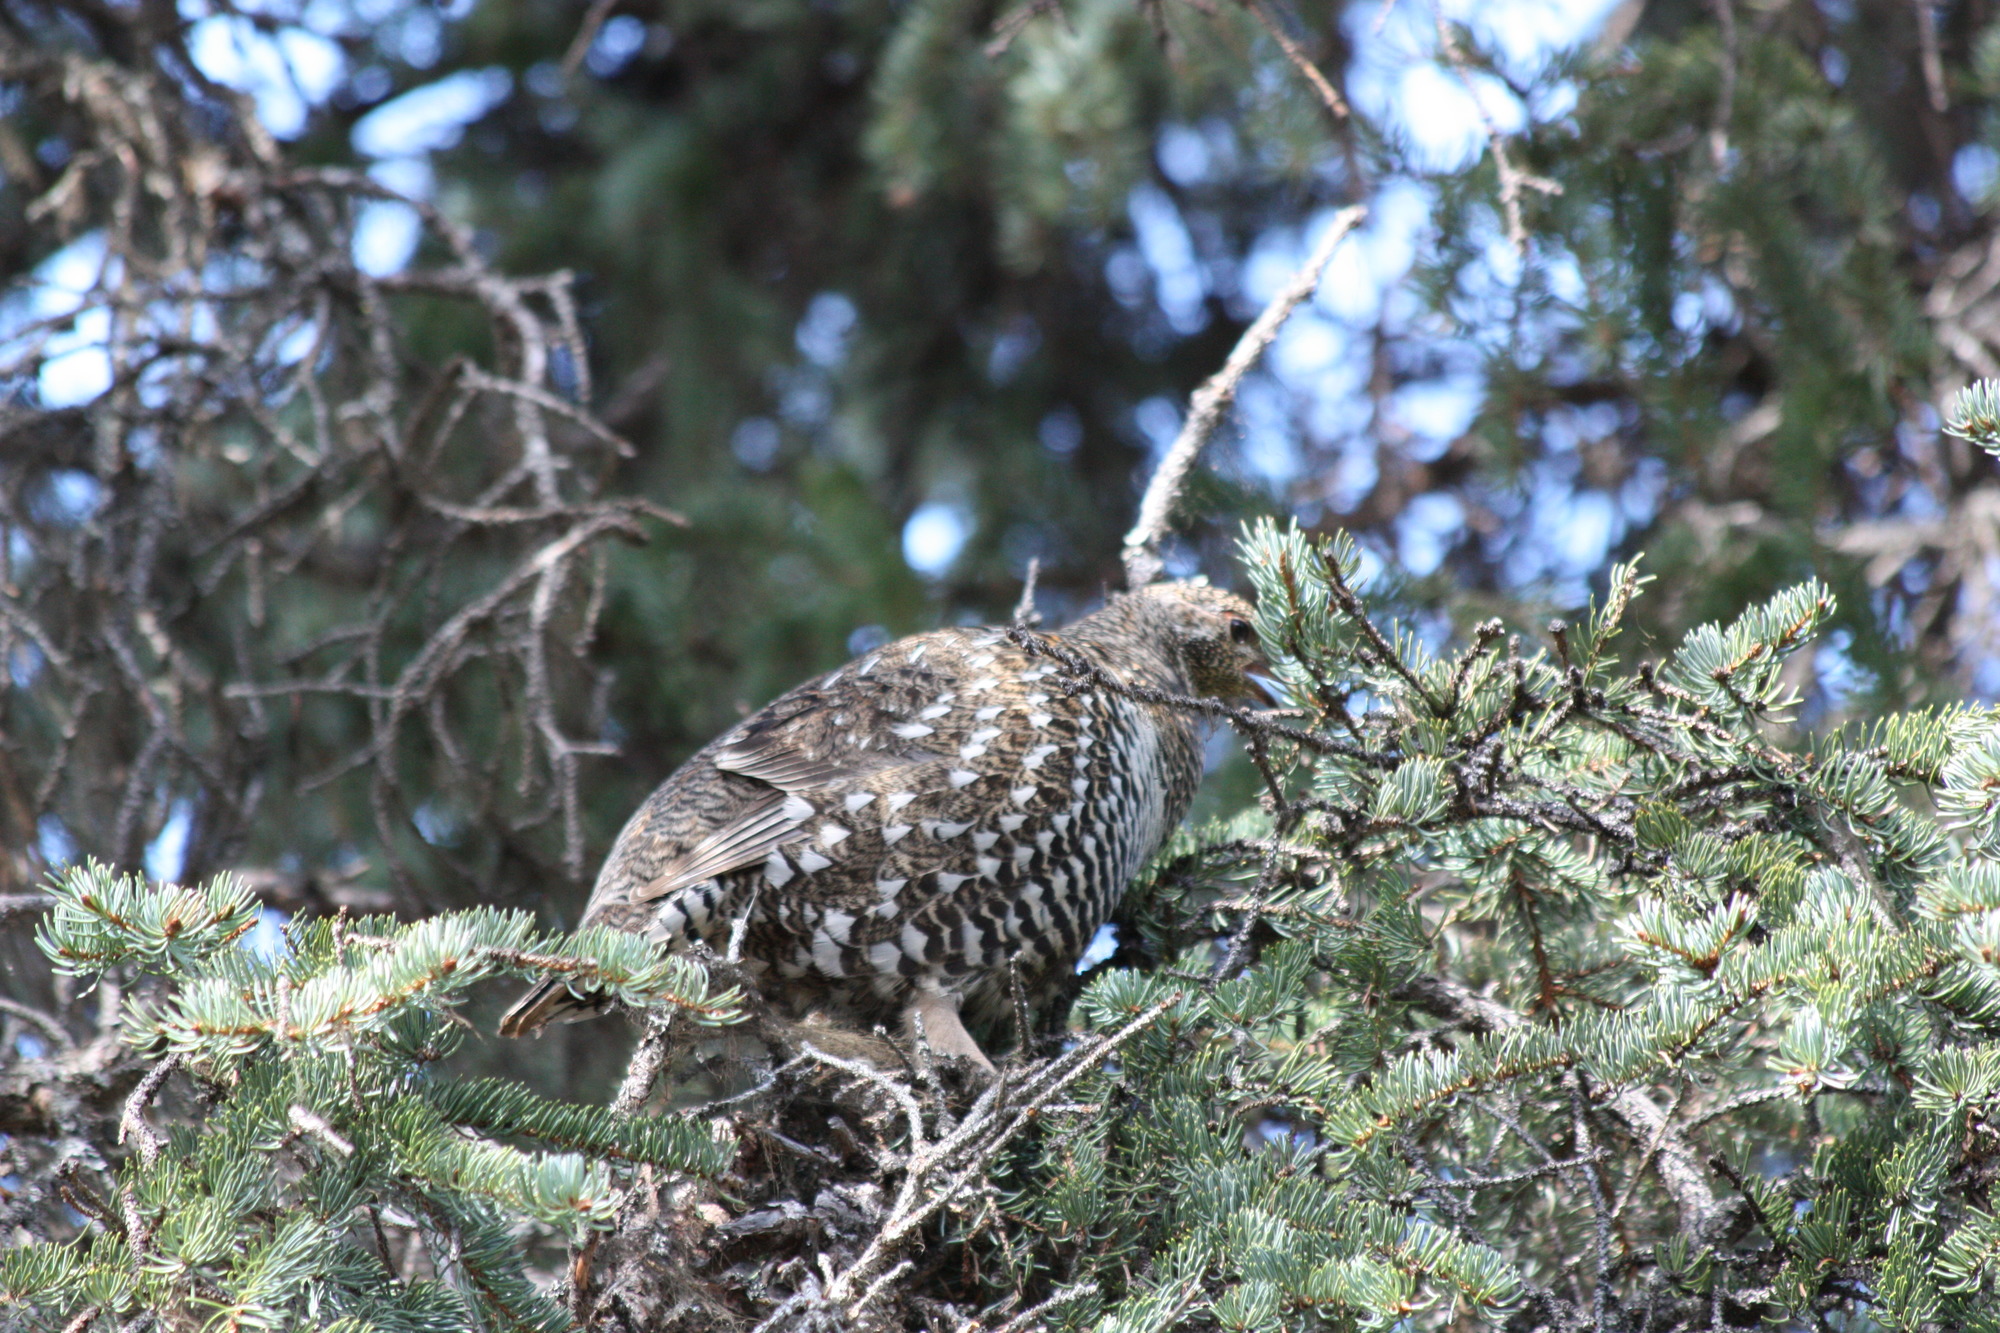 A spruce grouse in a spruce tree